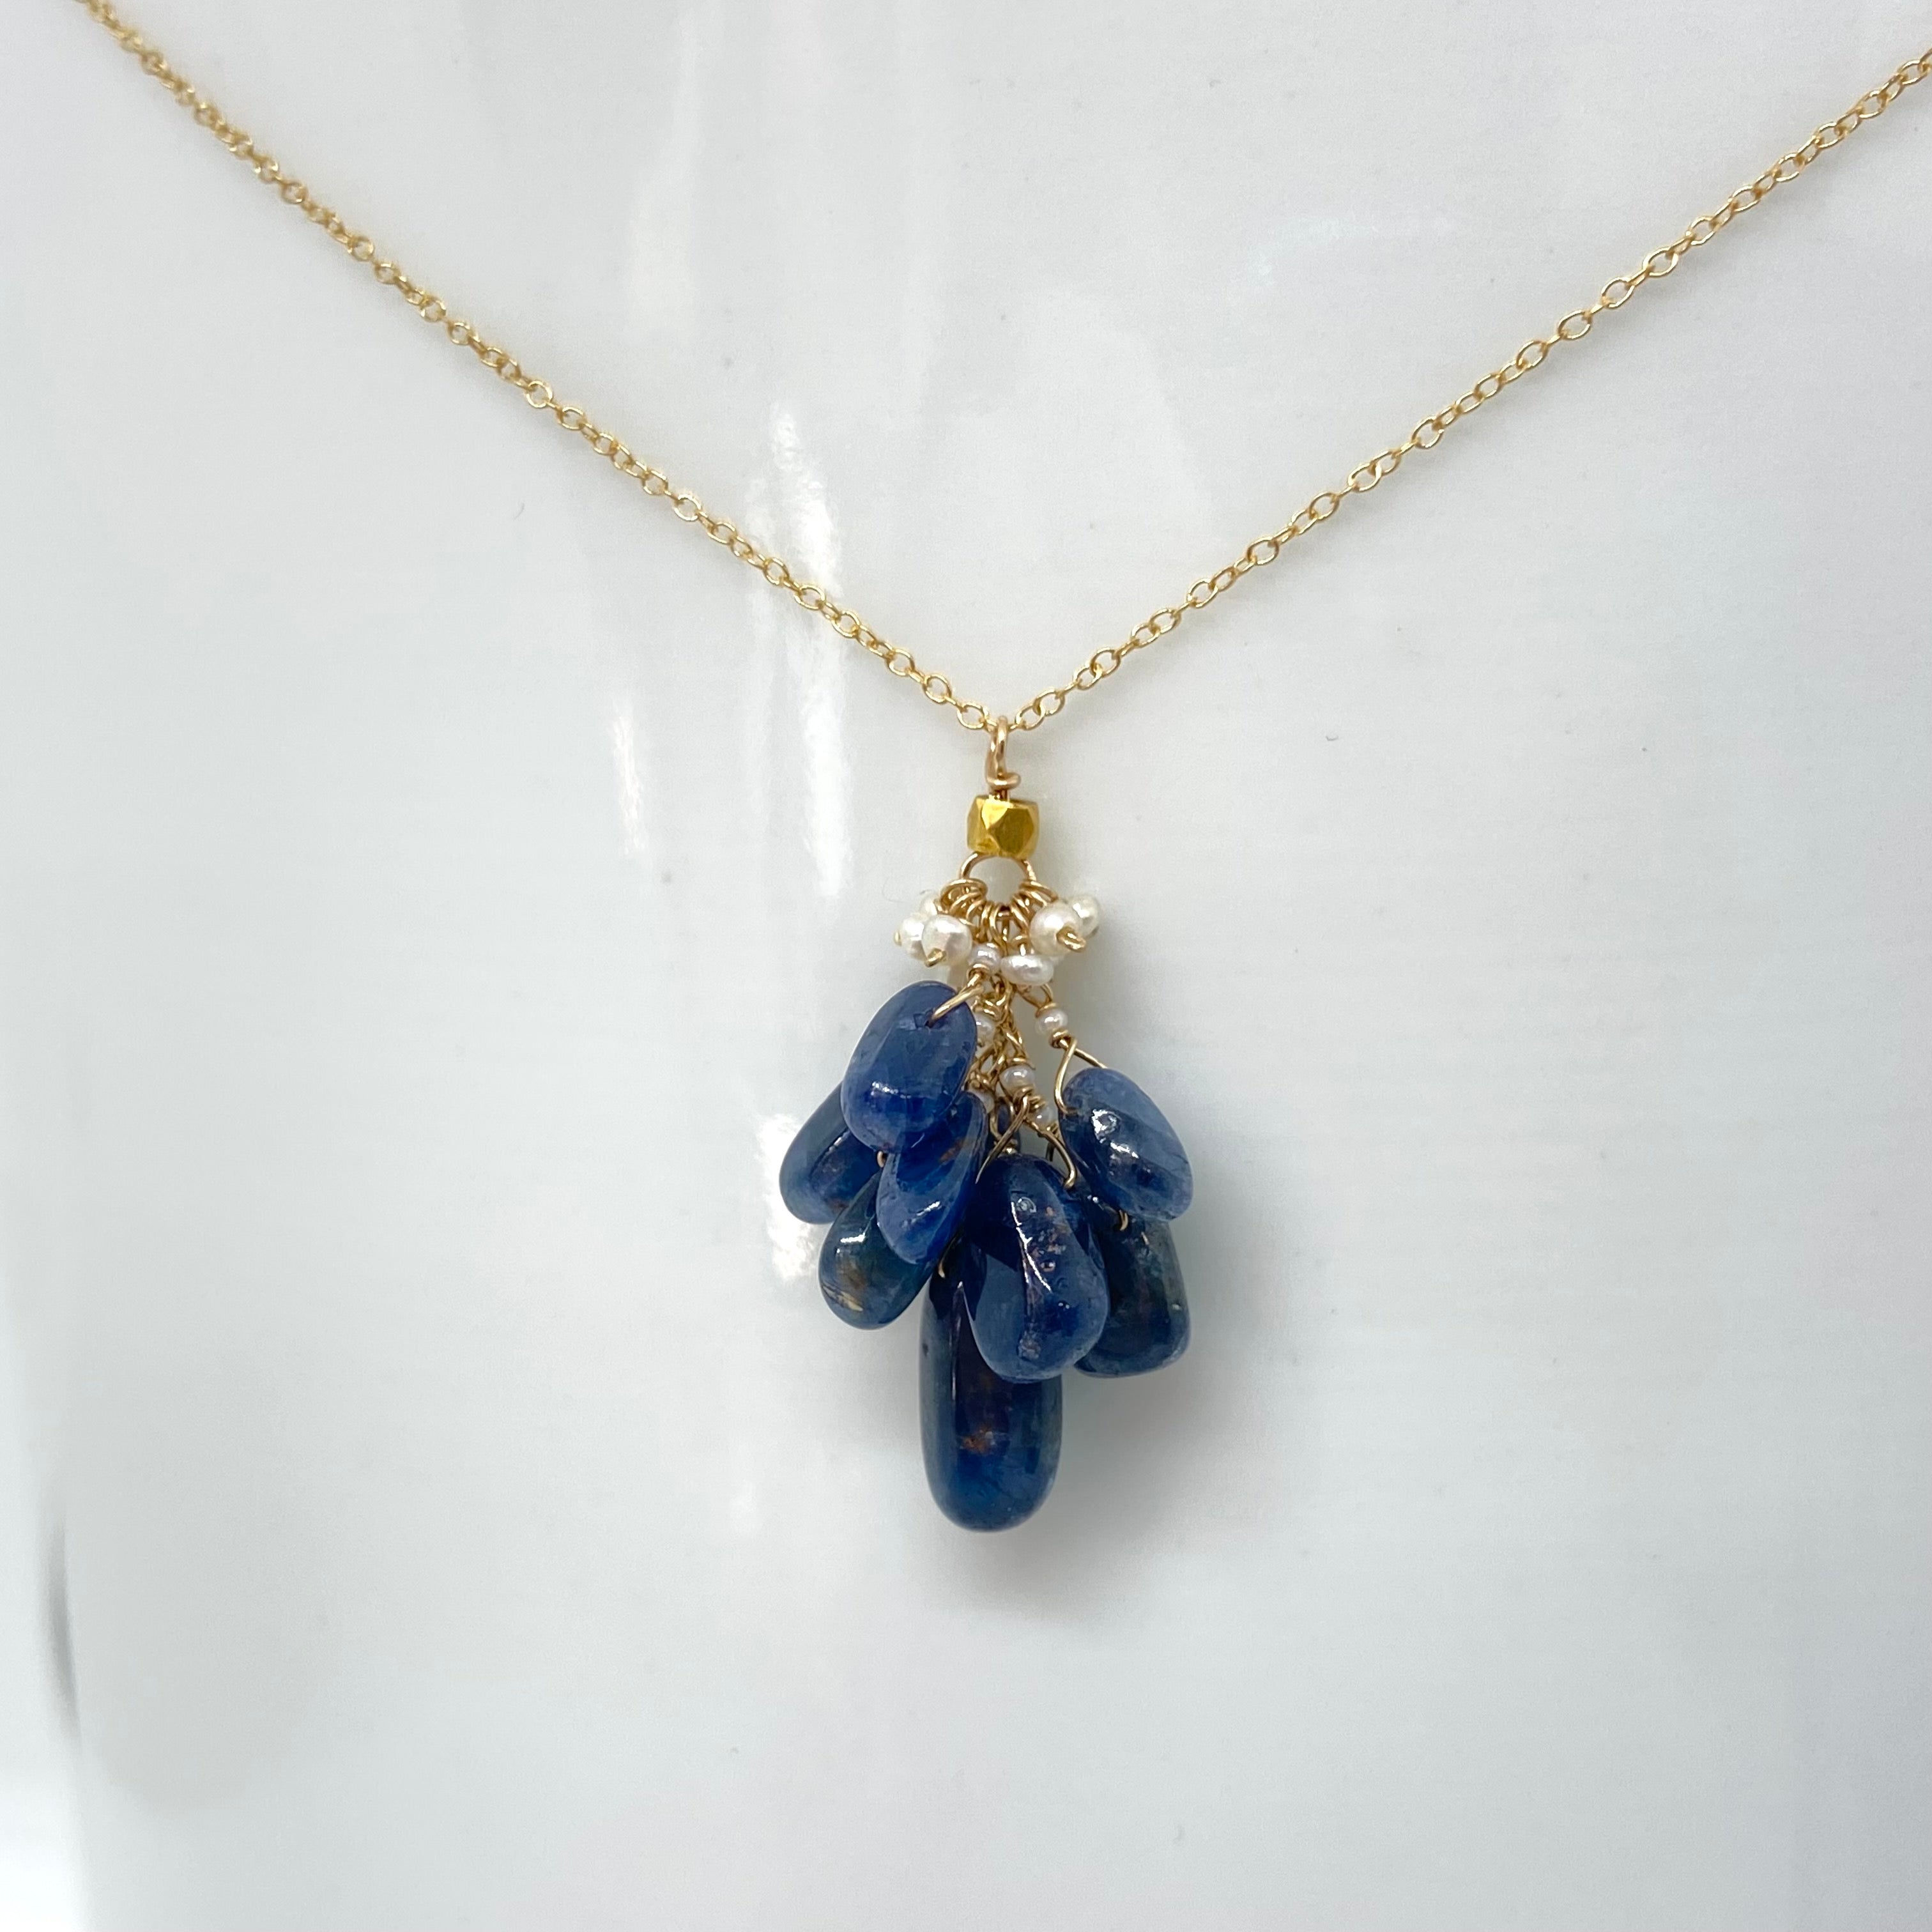 14k Gold Chain Necklace w/ Blue Sapphires, 18k Gold Nugget, Freshwater Pearls & Antique Italian Beads